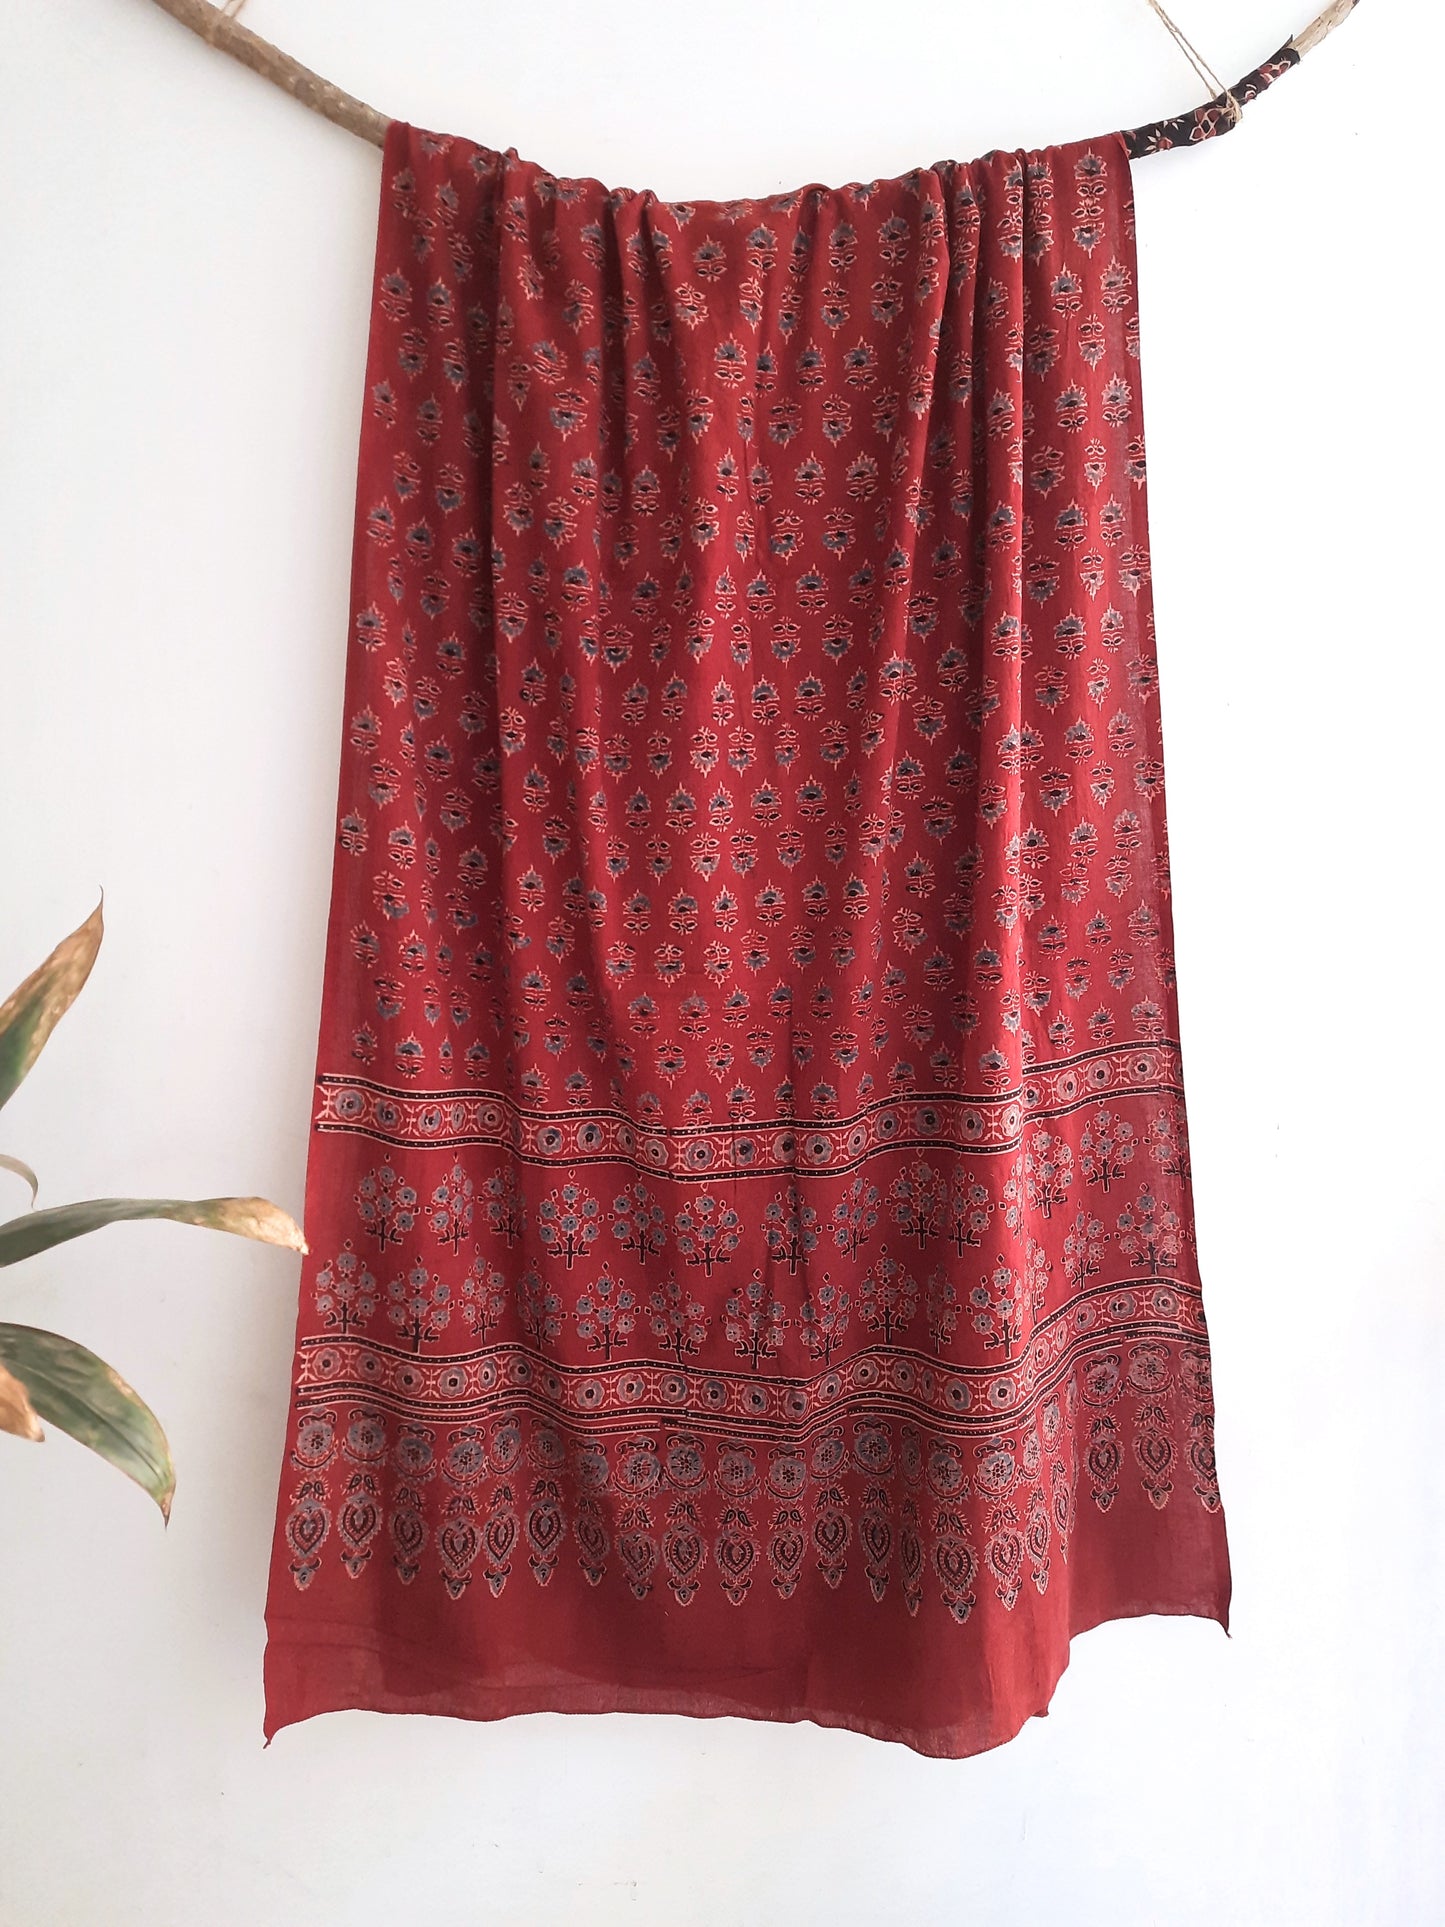 Madder Dyed Ajrakh Cotton Dupatta from Turquoisethestore: Handcrafted from pure cotton, adorned with traditional ajrakh prints. Elevate your summer style with this sustainable, versatile, and timeless artisanal piece. Shop now!